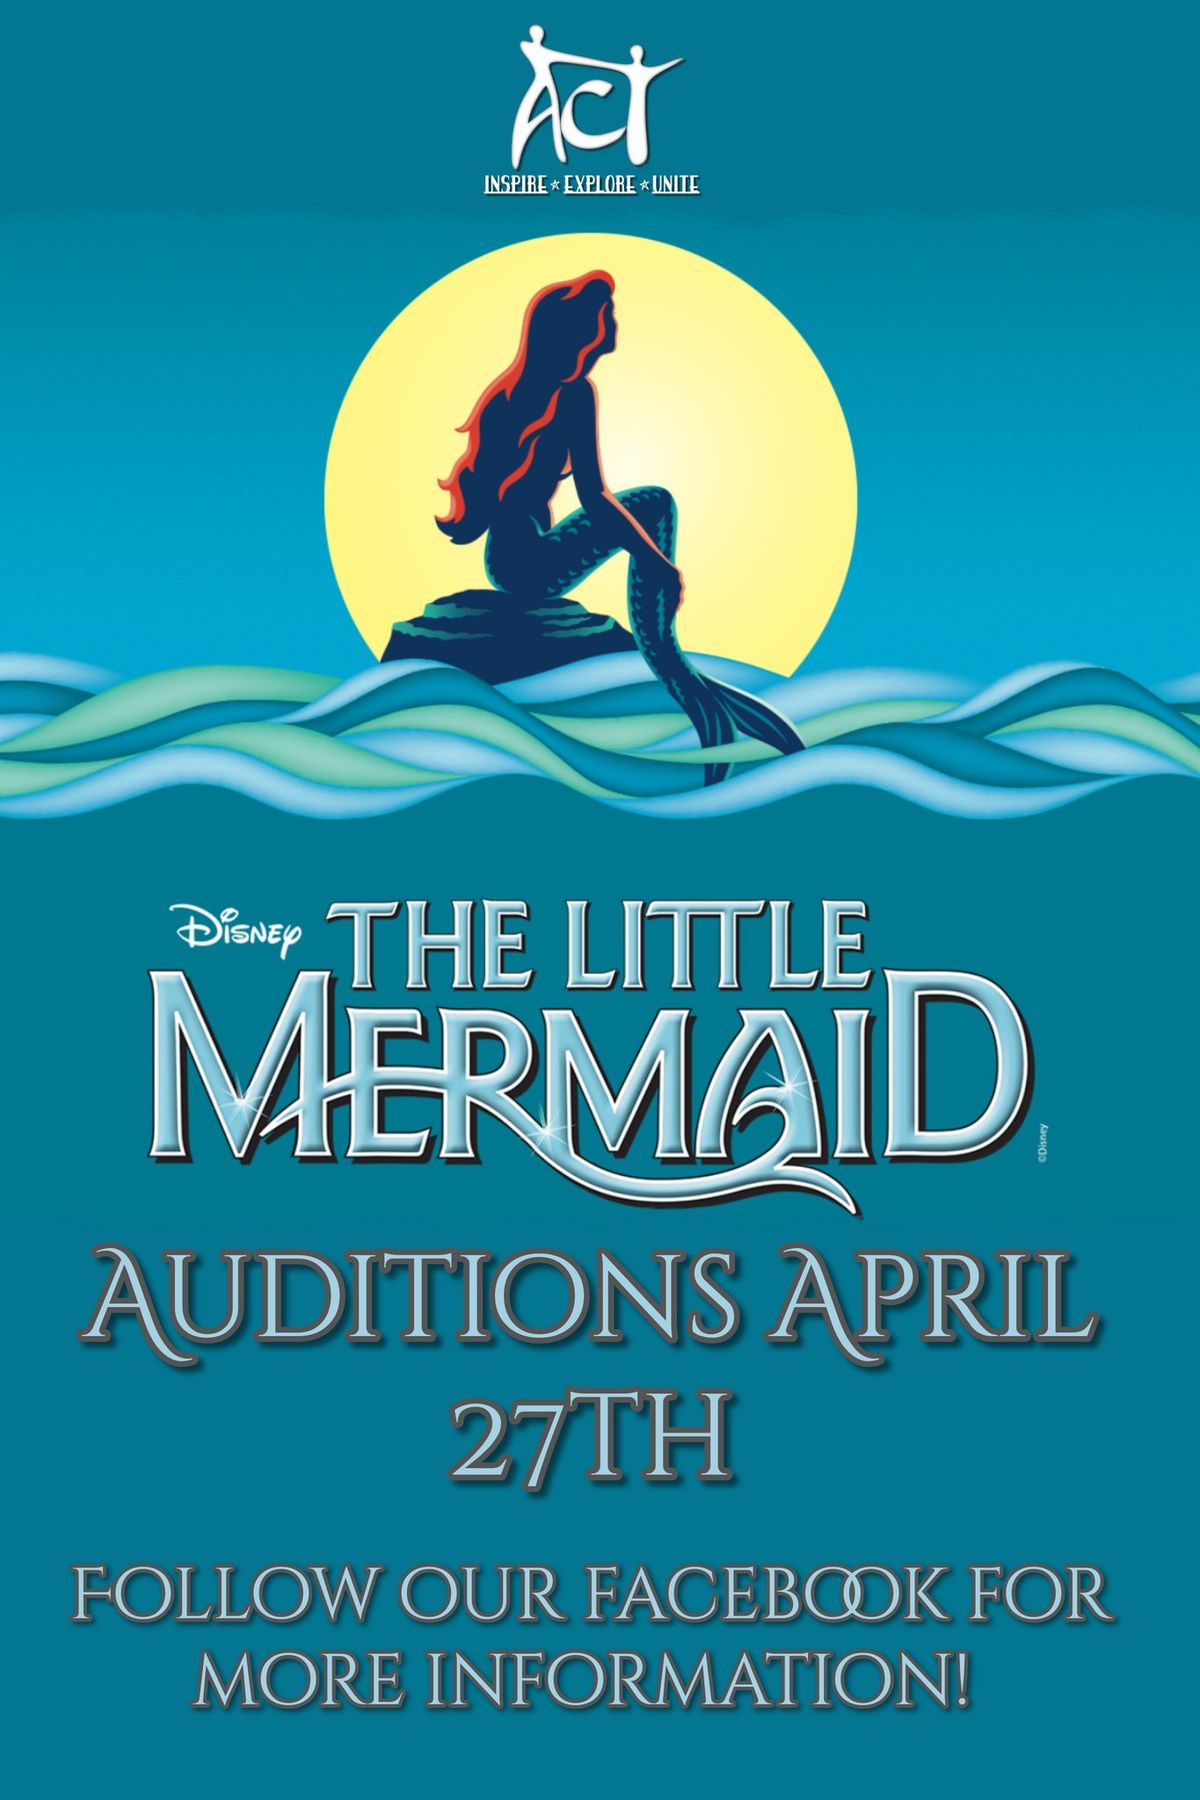 ACT The Little Mermaid - Auditions